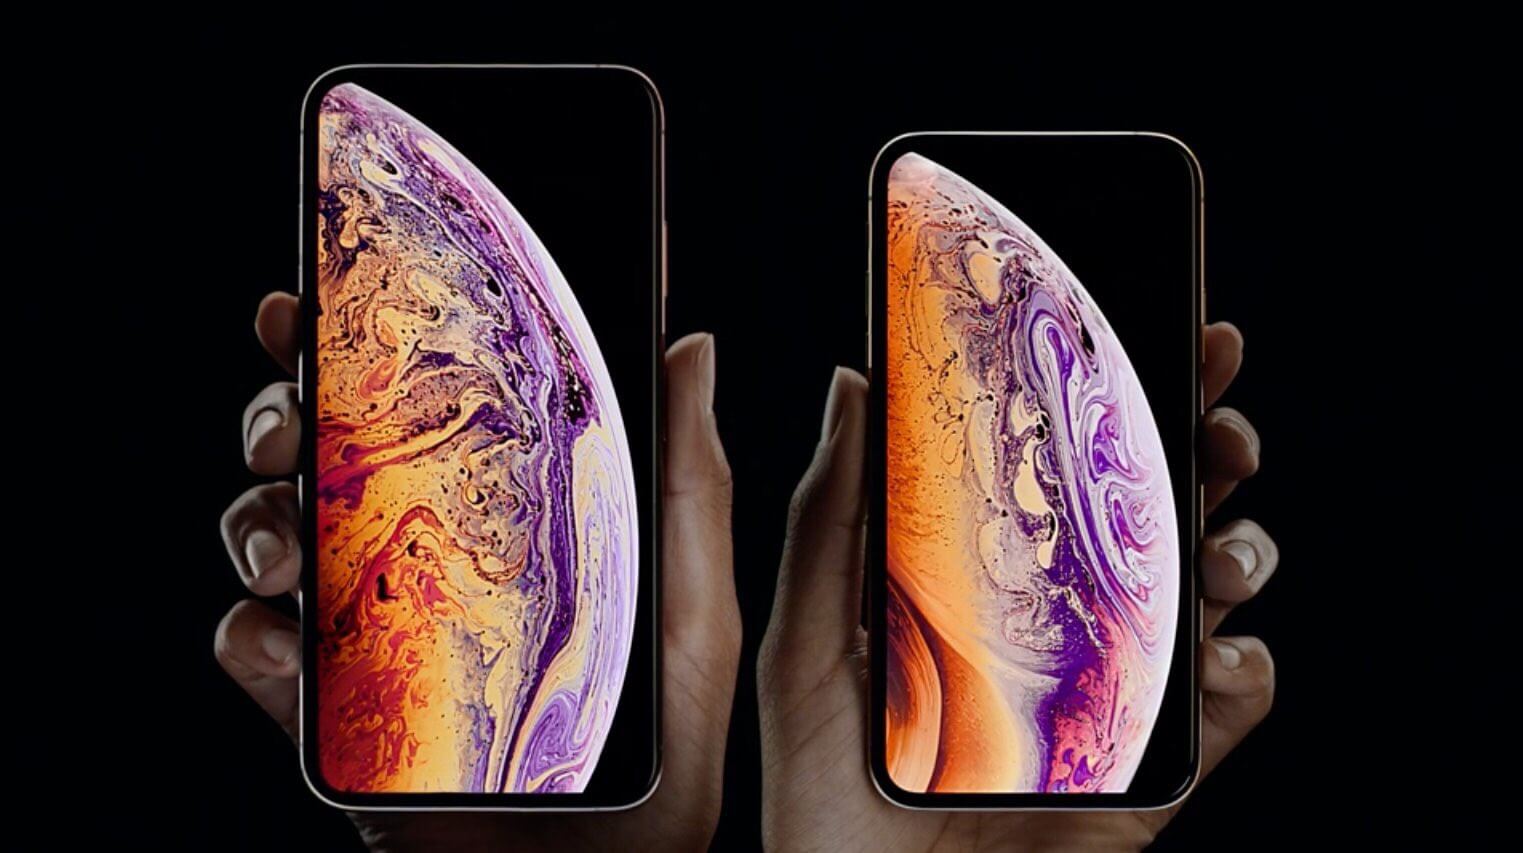 Apple iPhone Xs, iPhone Xs Max Launched Check Price in India, Specs, launch date, camera, performance